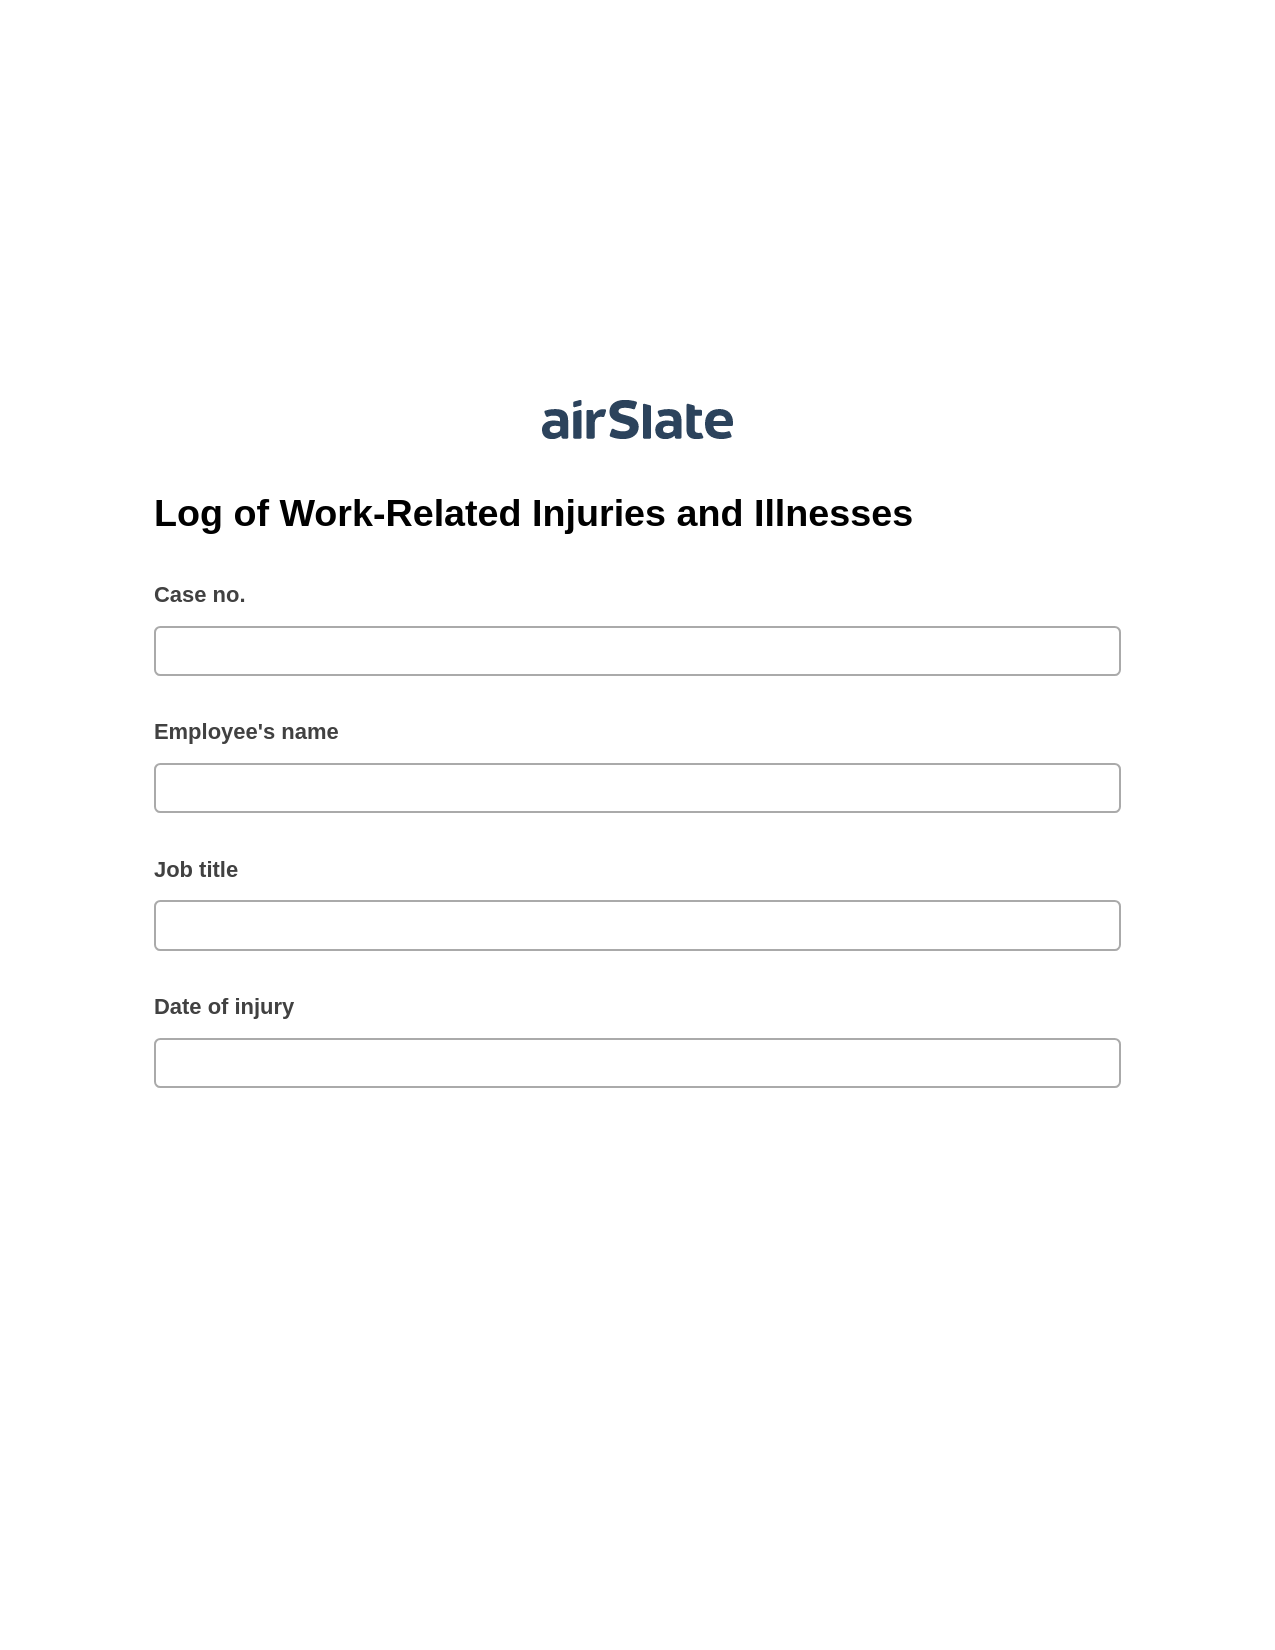 Log of Work-Related Injuries and Illnesses Pre-fill from another Slate Bot, Create Salesforce Record Bot, Archive to SharePoint Folder Bot